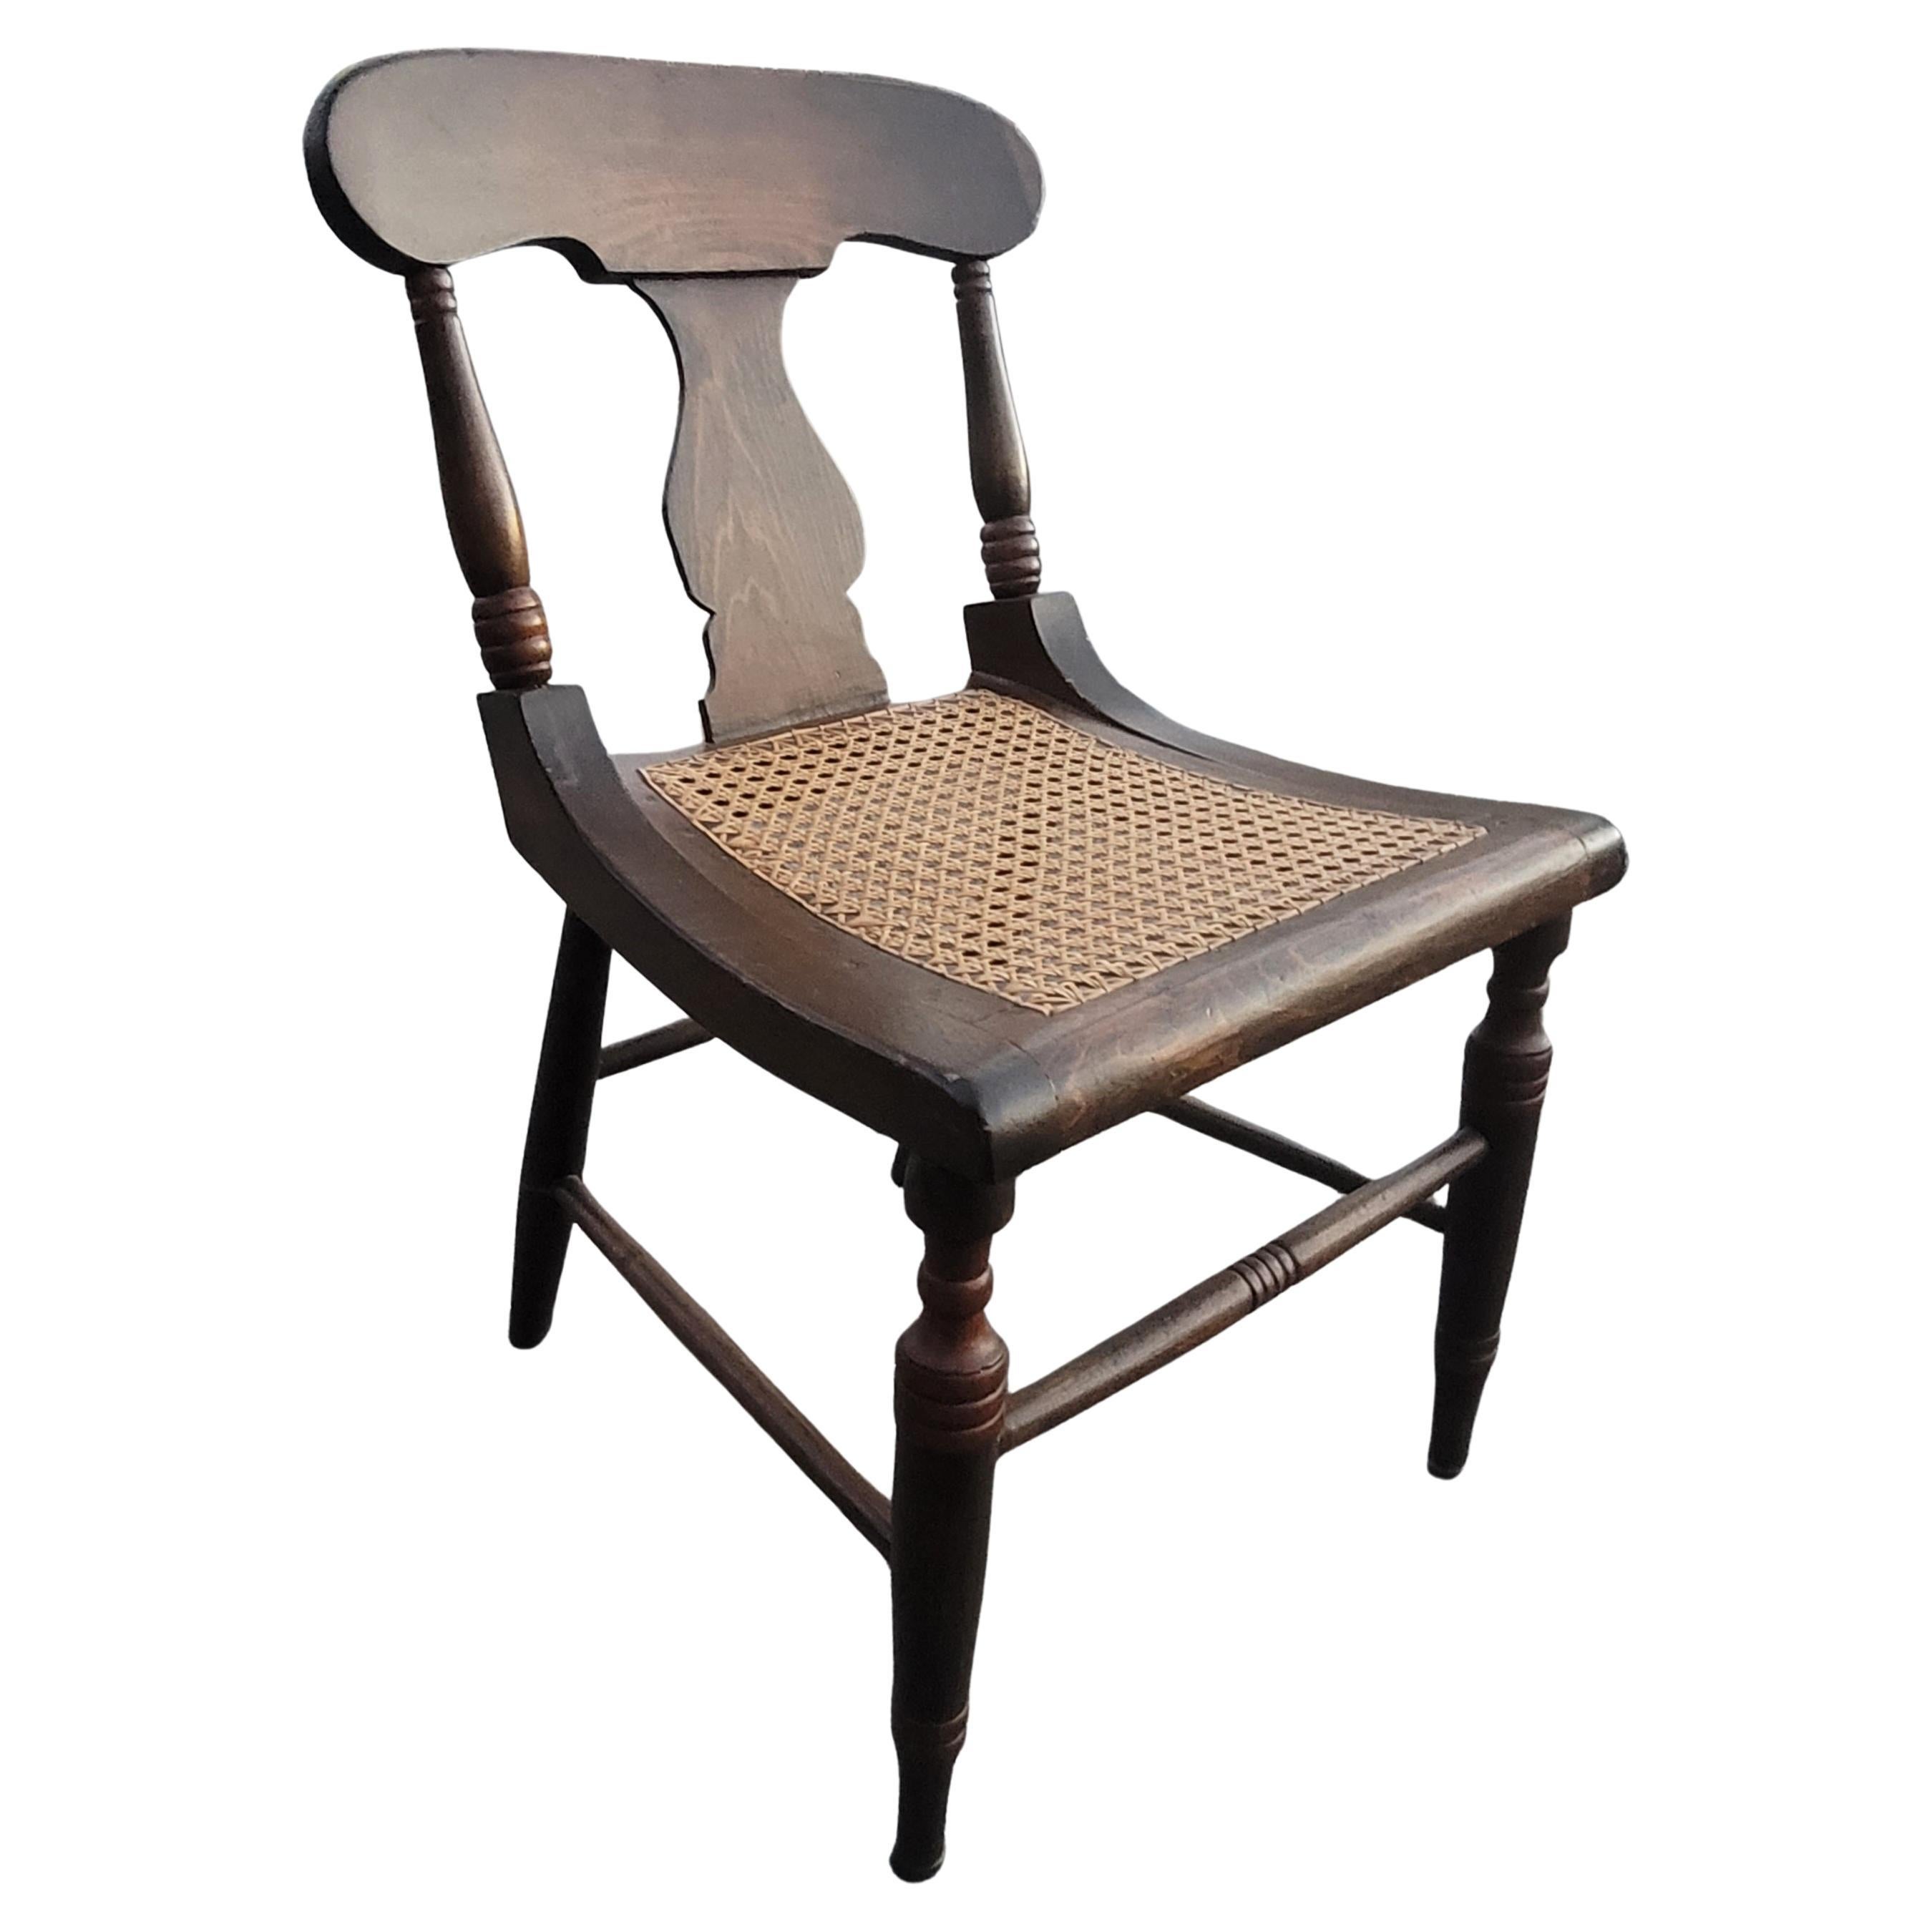 Early 20th century American Victorian Cane Seat Side Chair. Newer caning and good condition. Measures 18